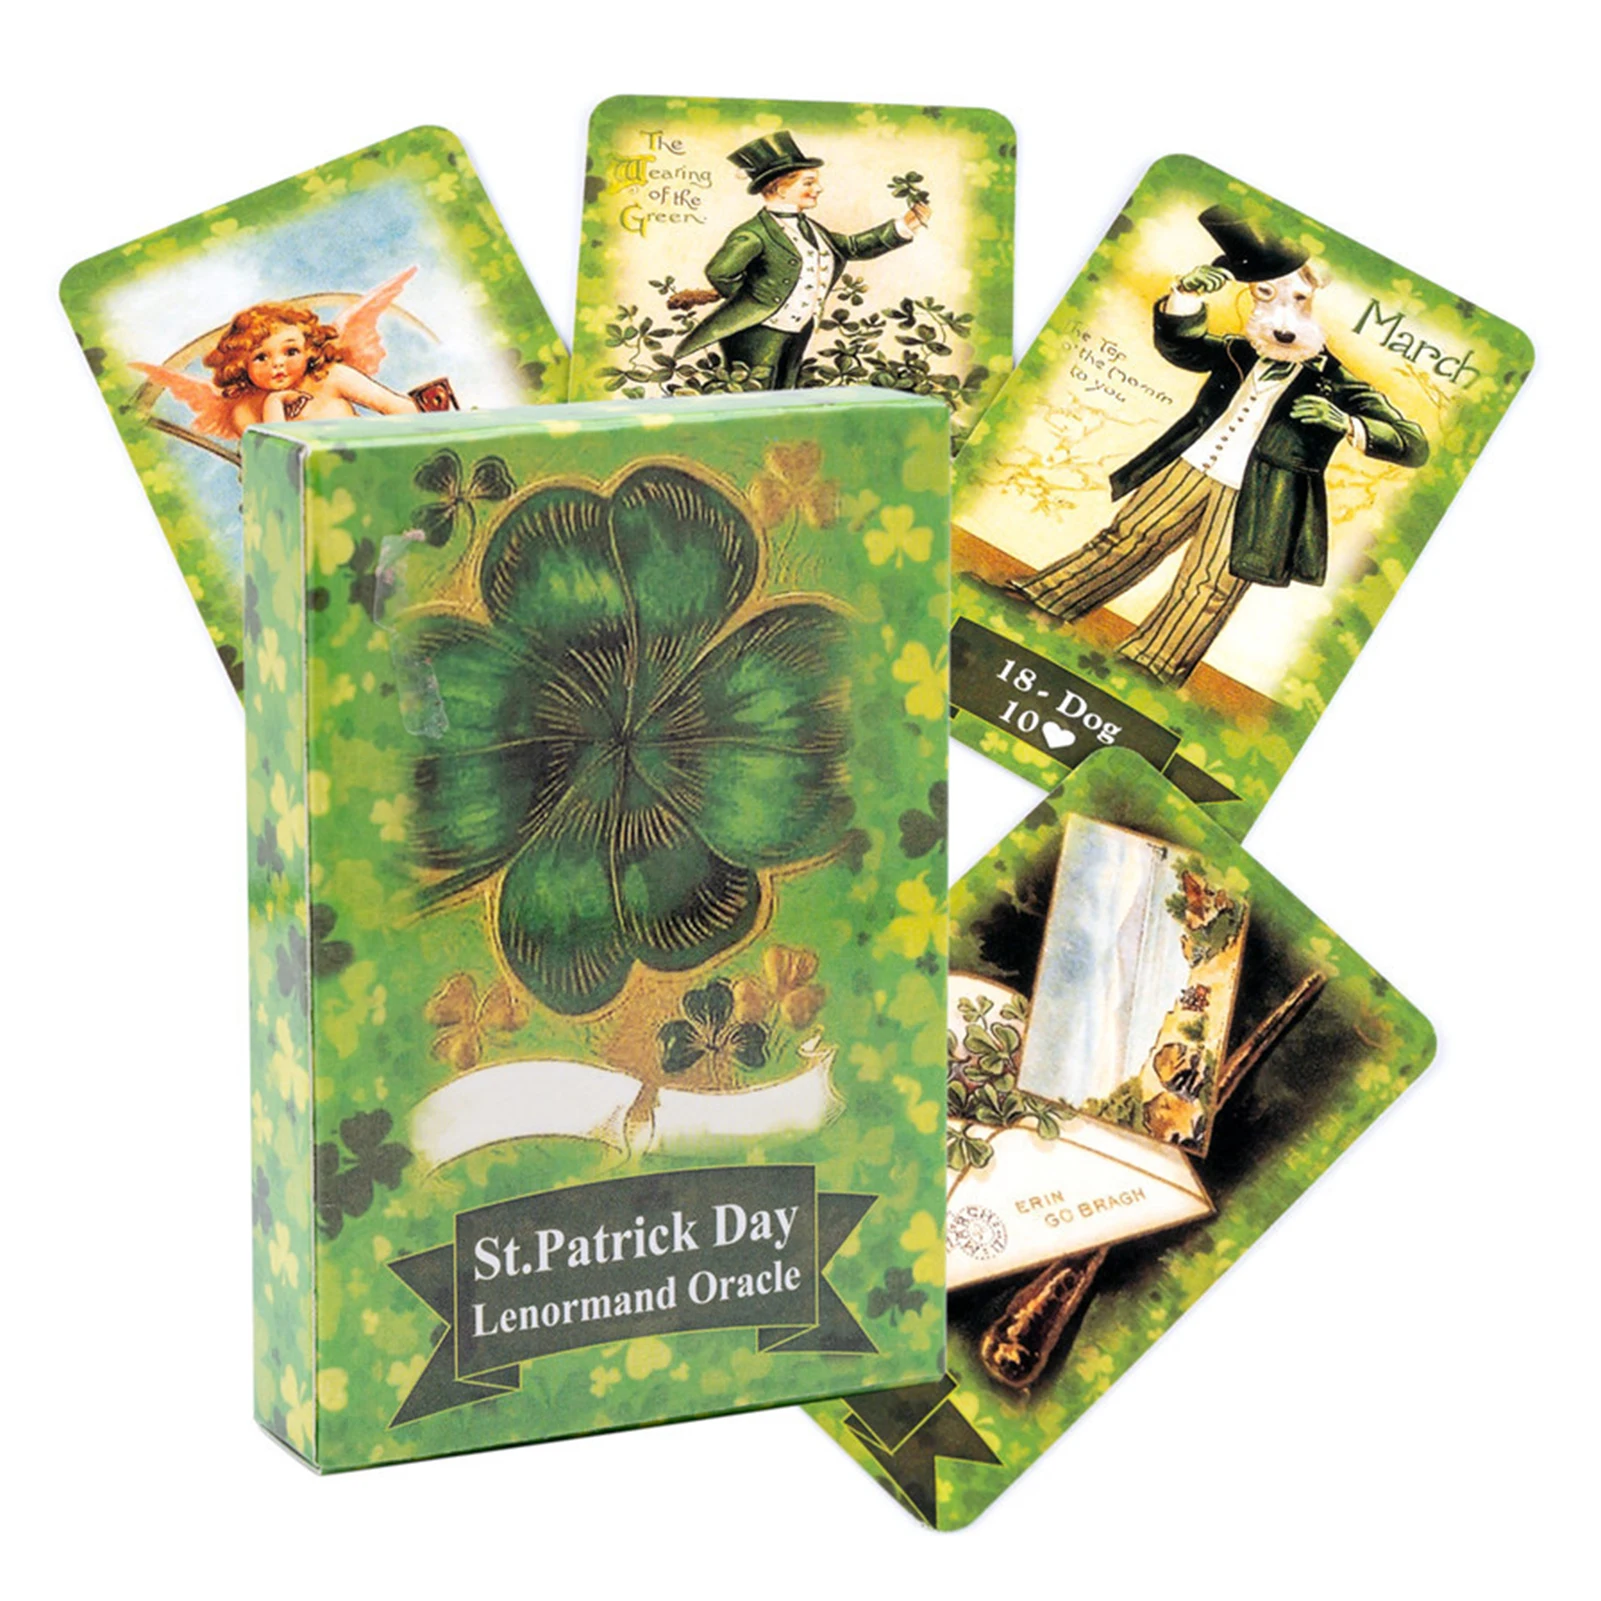 

St Patrick Day Lenormand Oracle Divination Fate Board Games English Version Clover Reynolds Tarot Cards Tarot Deck Oracles Cards